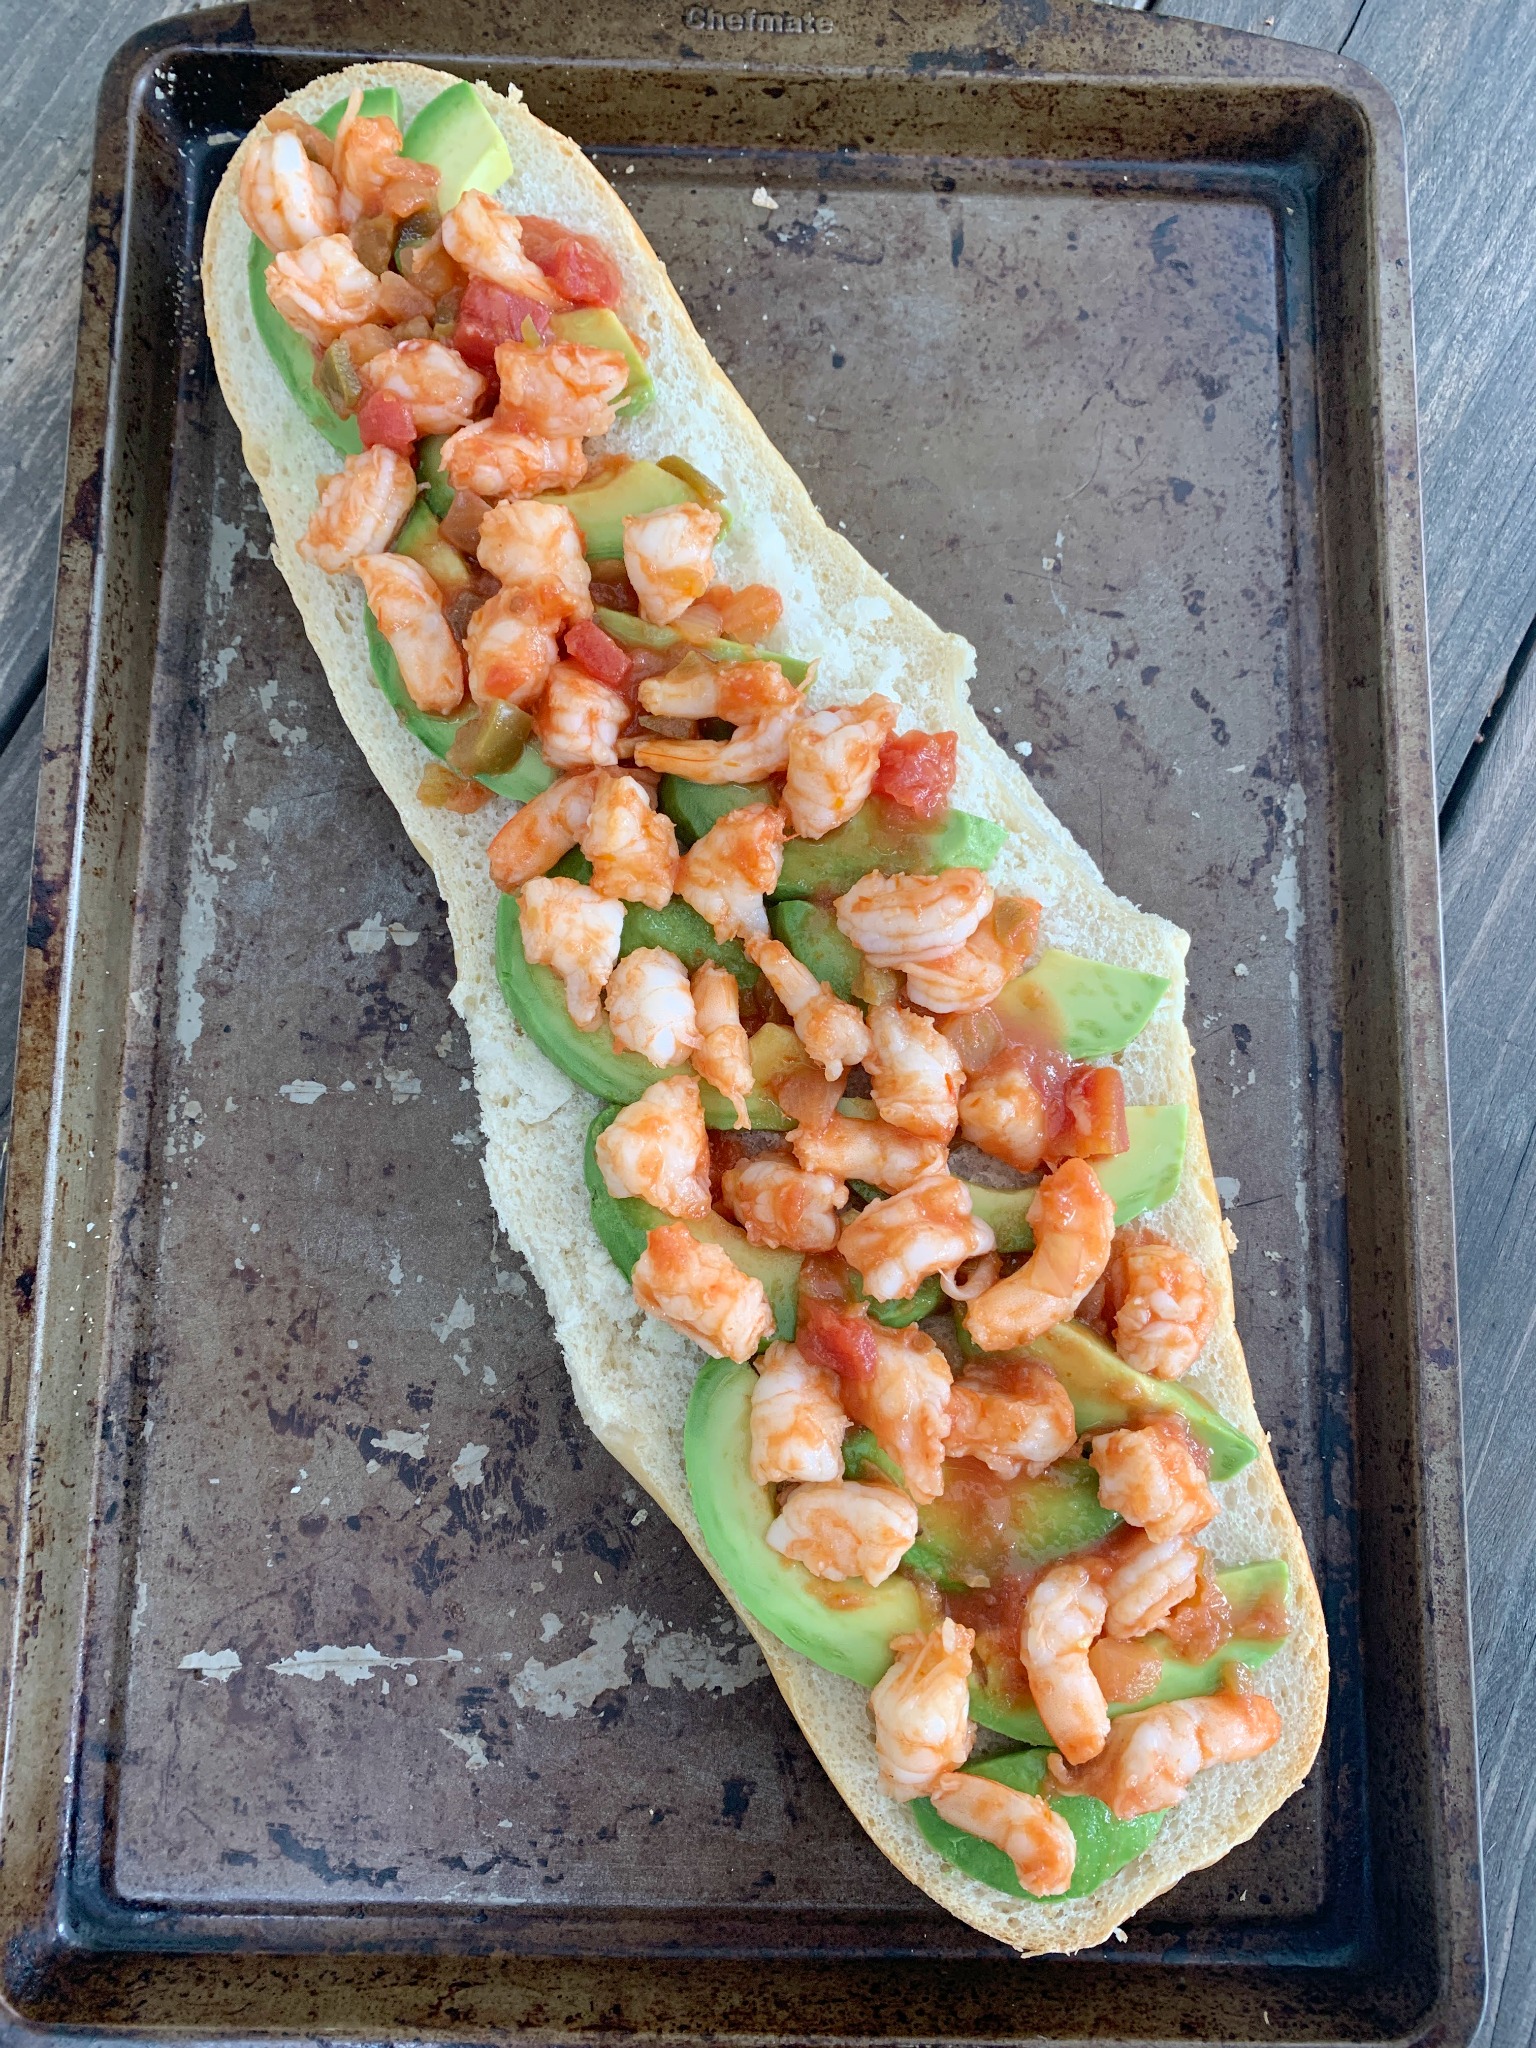 half a loaf of french bread with avocado slices and chopped shrimp